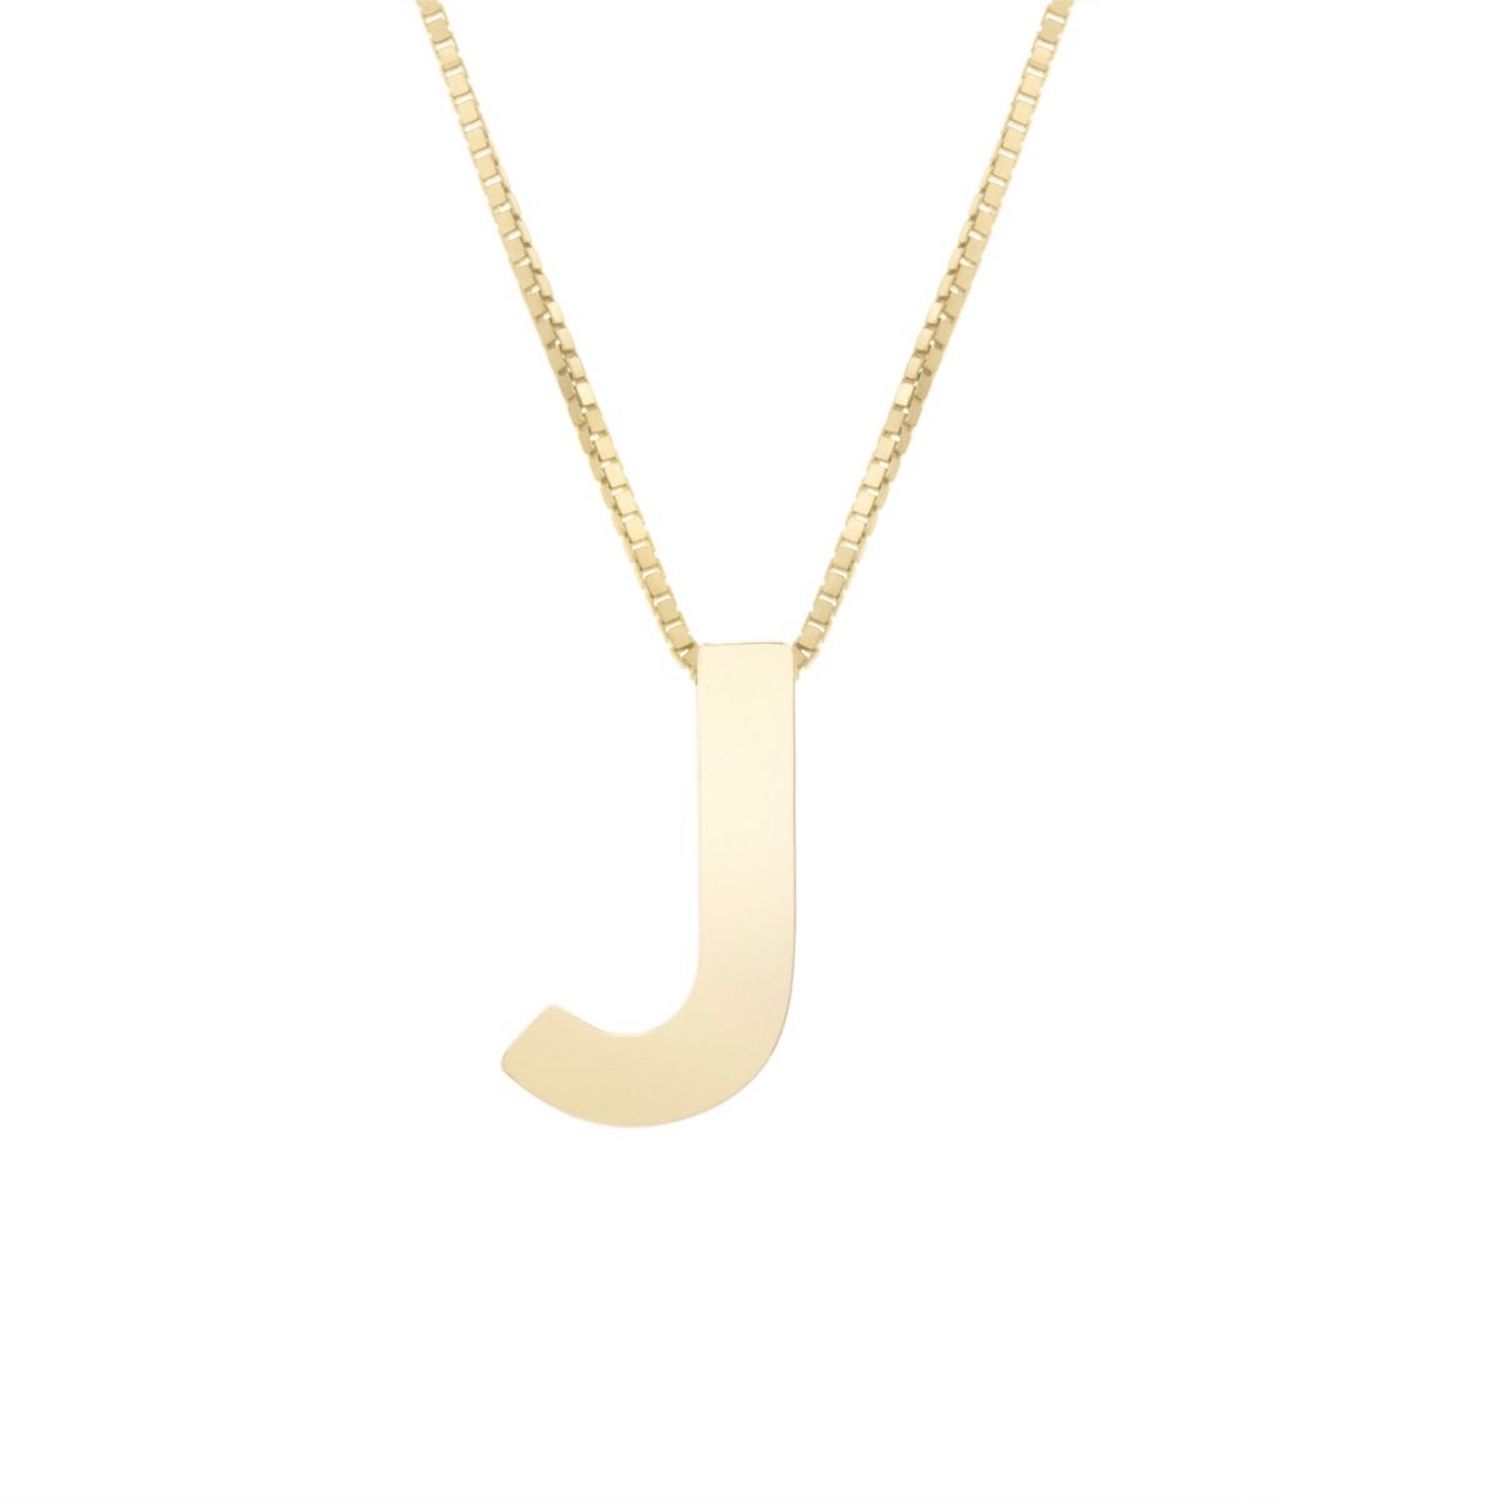 14K Yellow Gold Block Letter Initial Pendant Box Chain Necklace 16"-18" - J